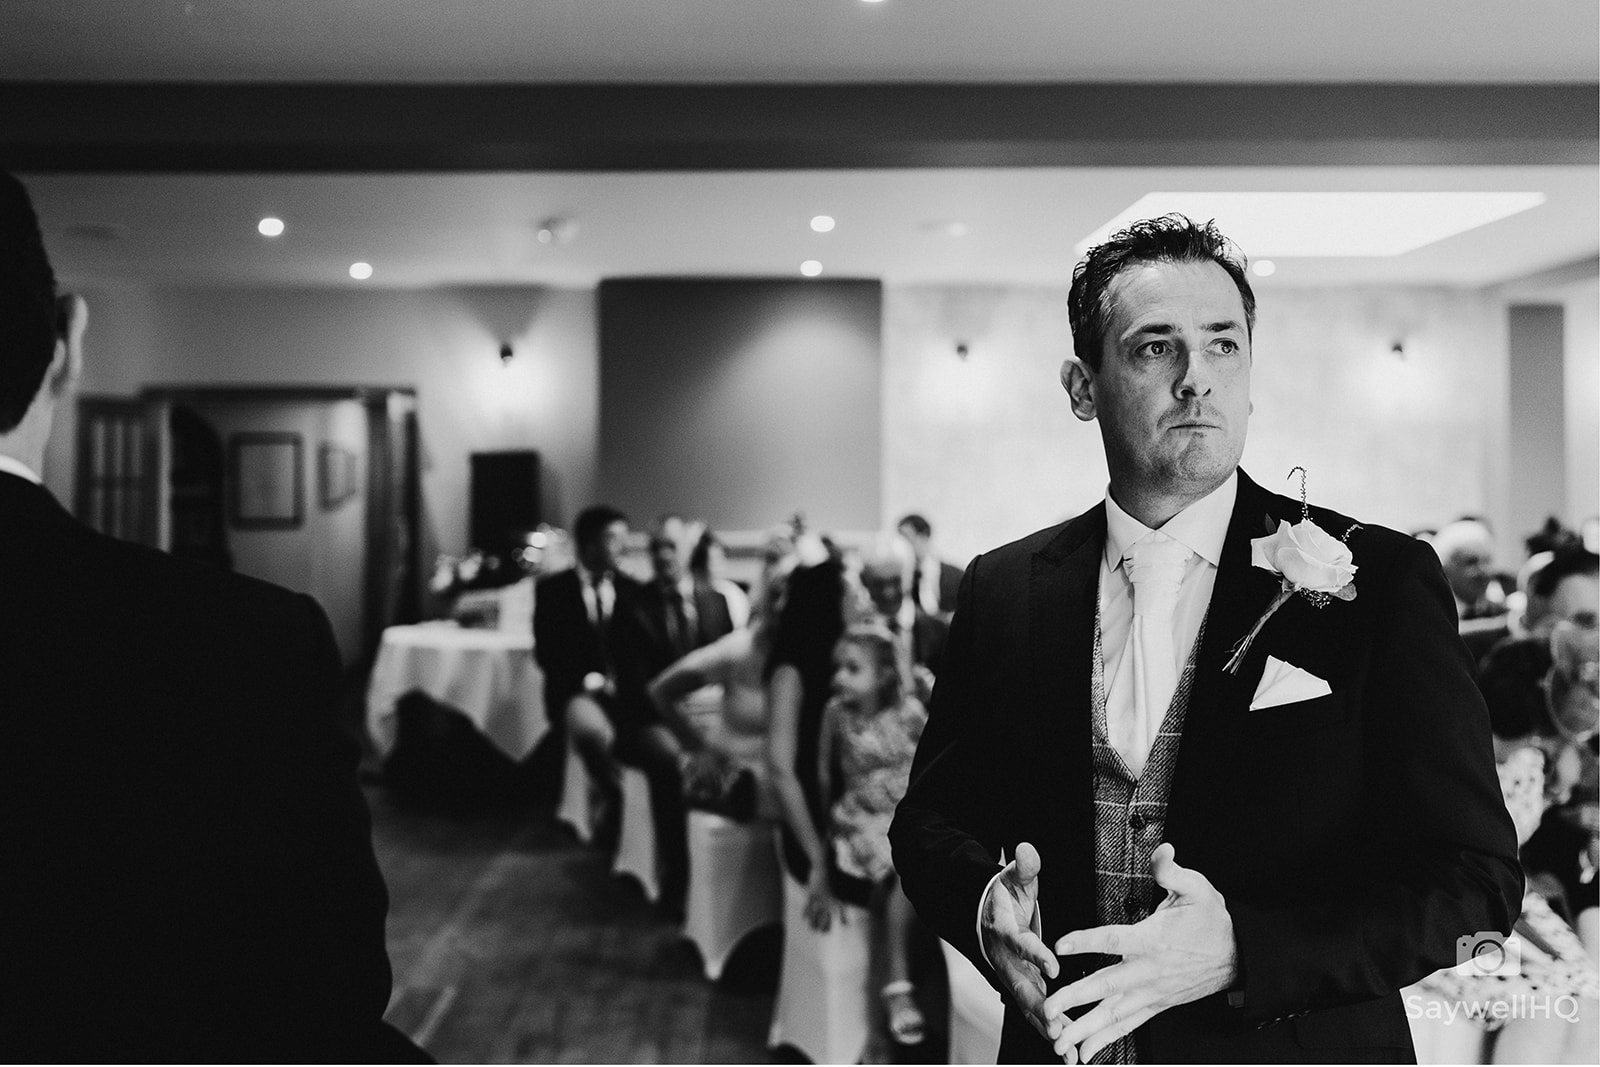 The Chequers Inn Wedding Photography - room, looking nervous before the start of the wedding ceremony